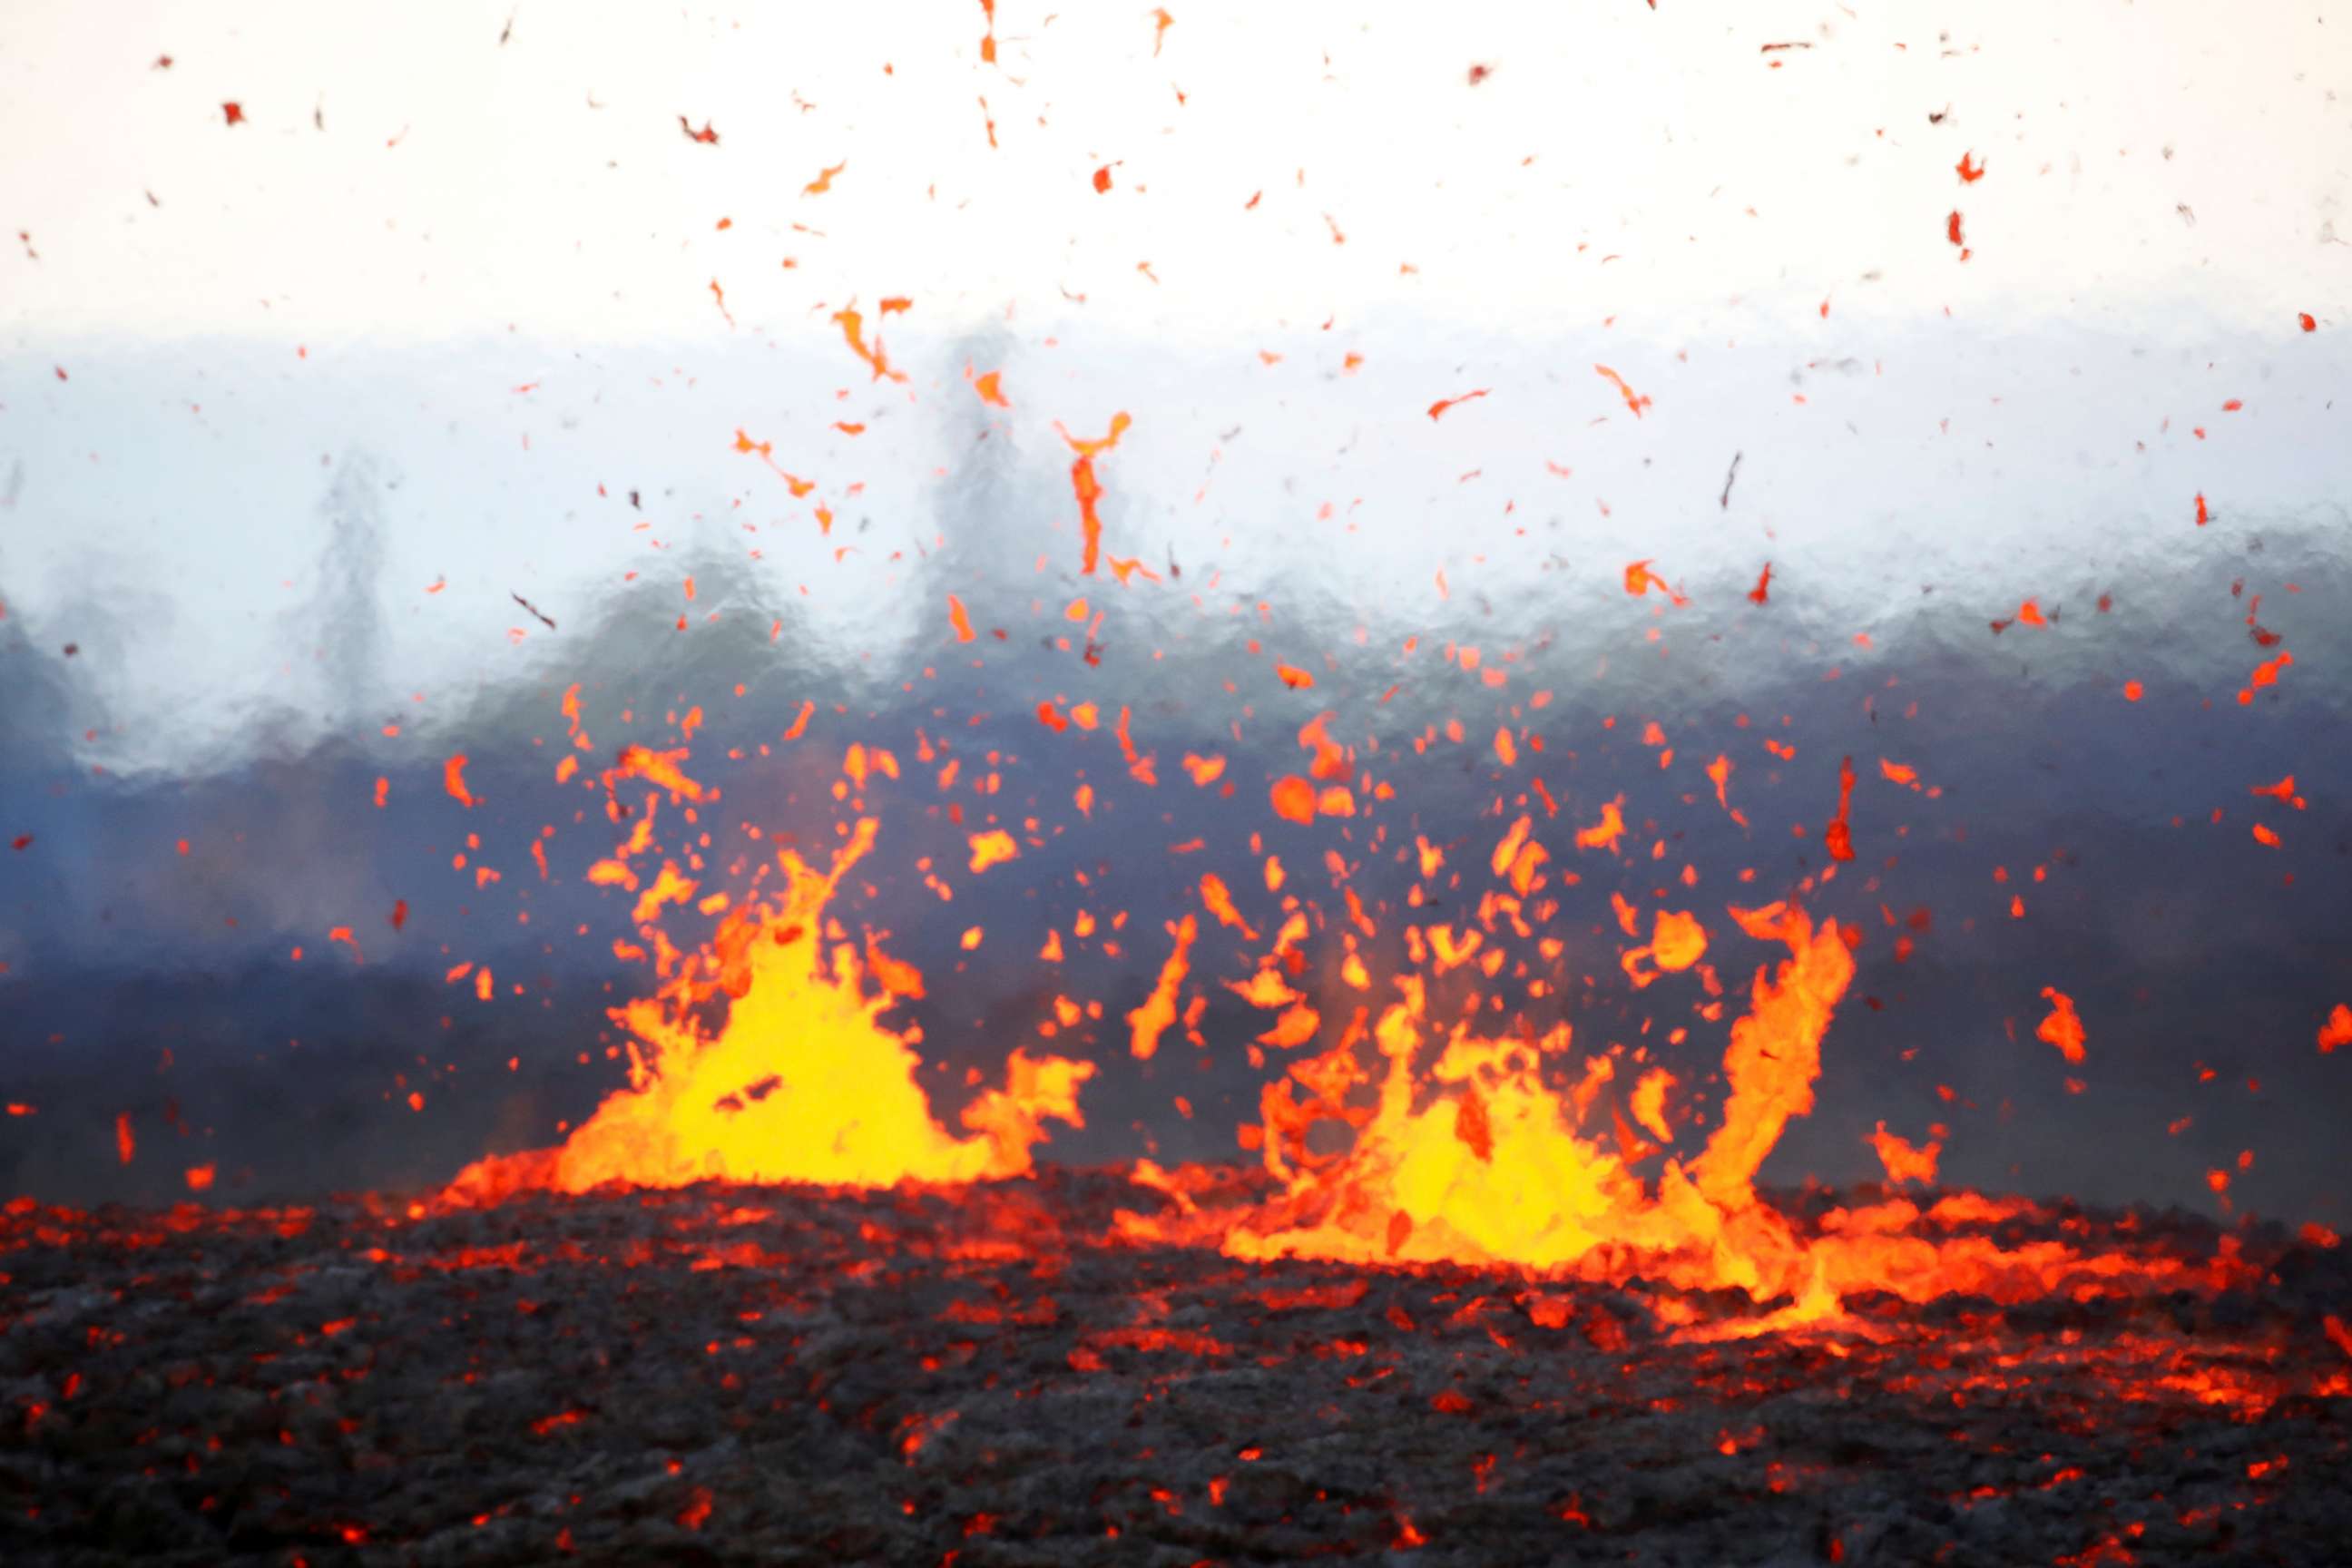 PHOTO: Lava erupts from a fissure on the outskirts of Pahoa during ongoing eruptions of the Kilauea Volcano in Hawaii, May 14, 2018.